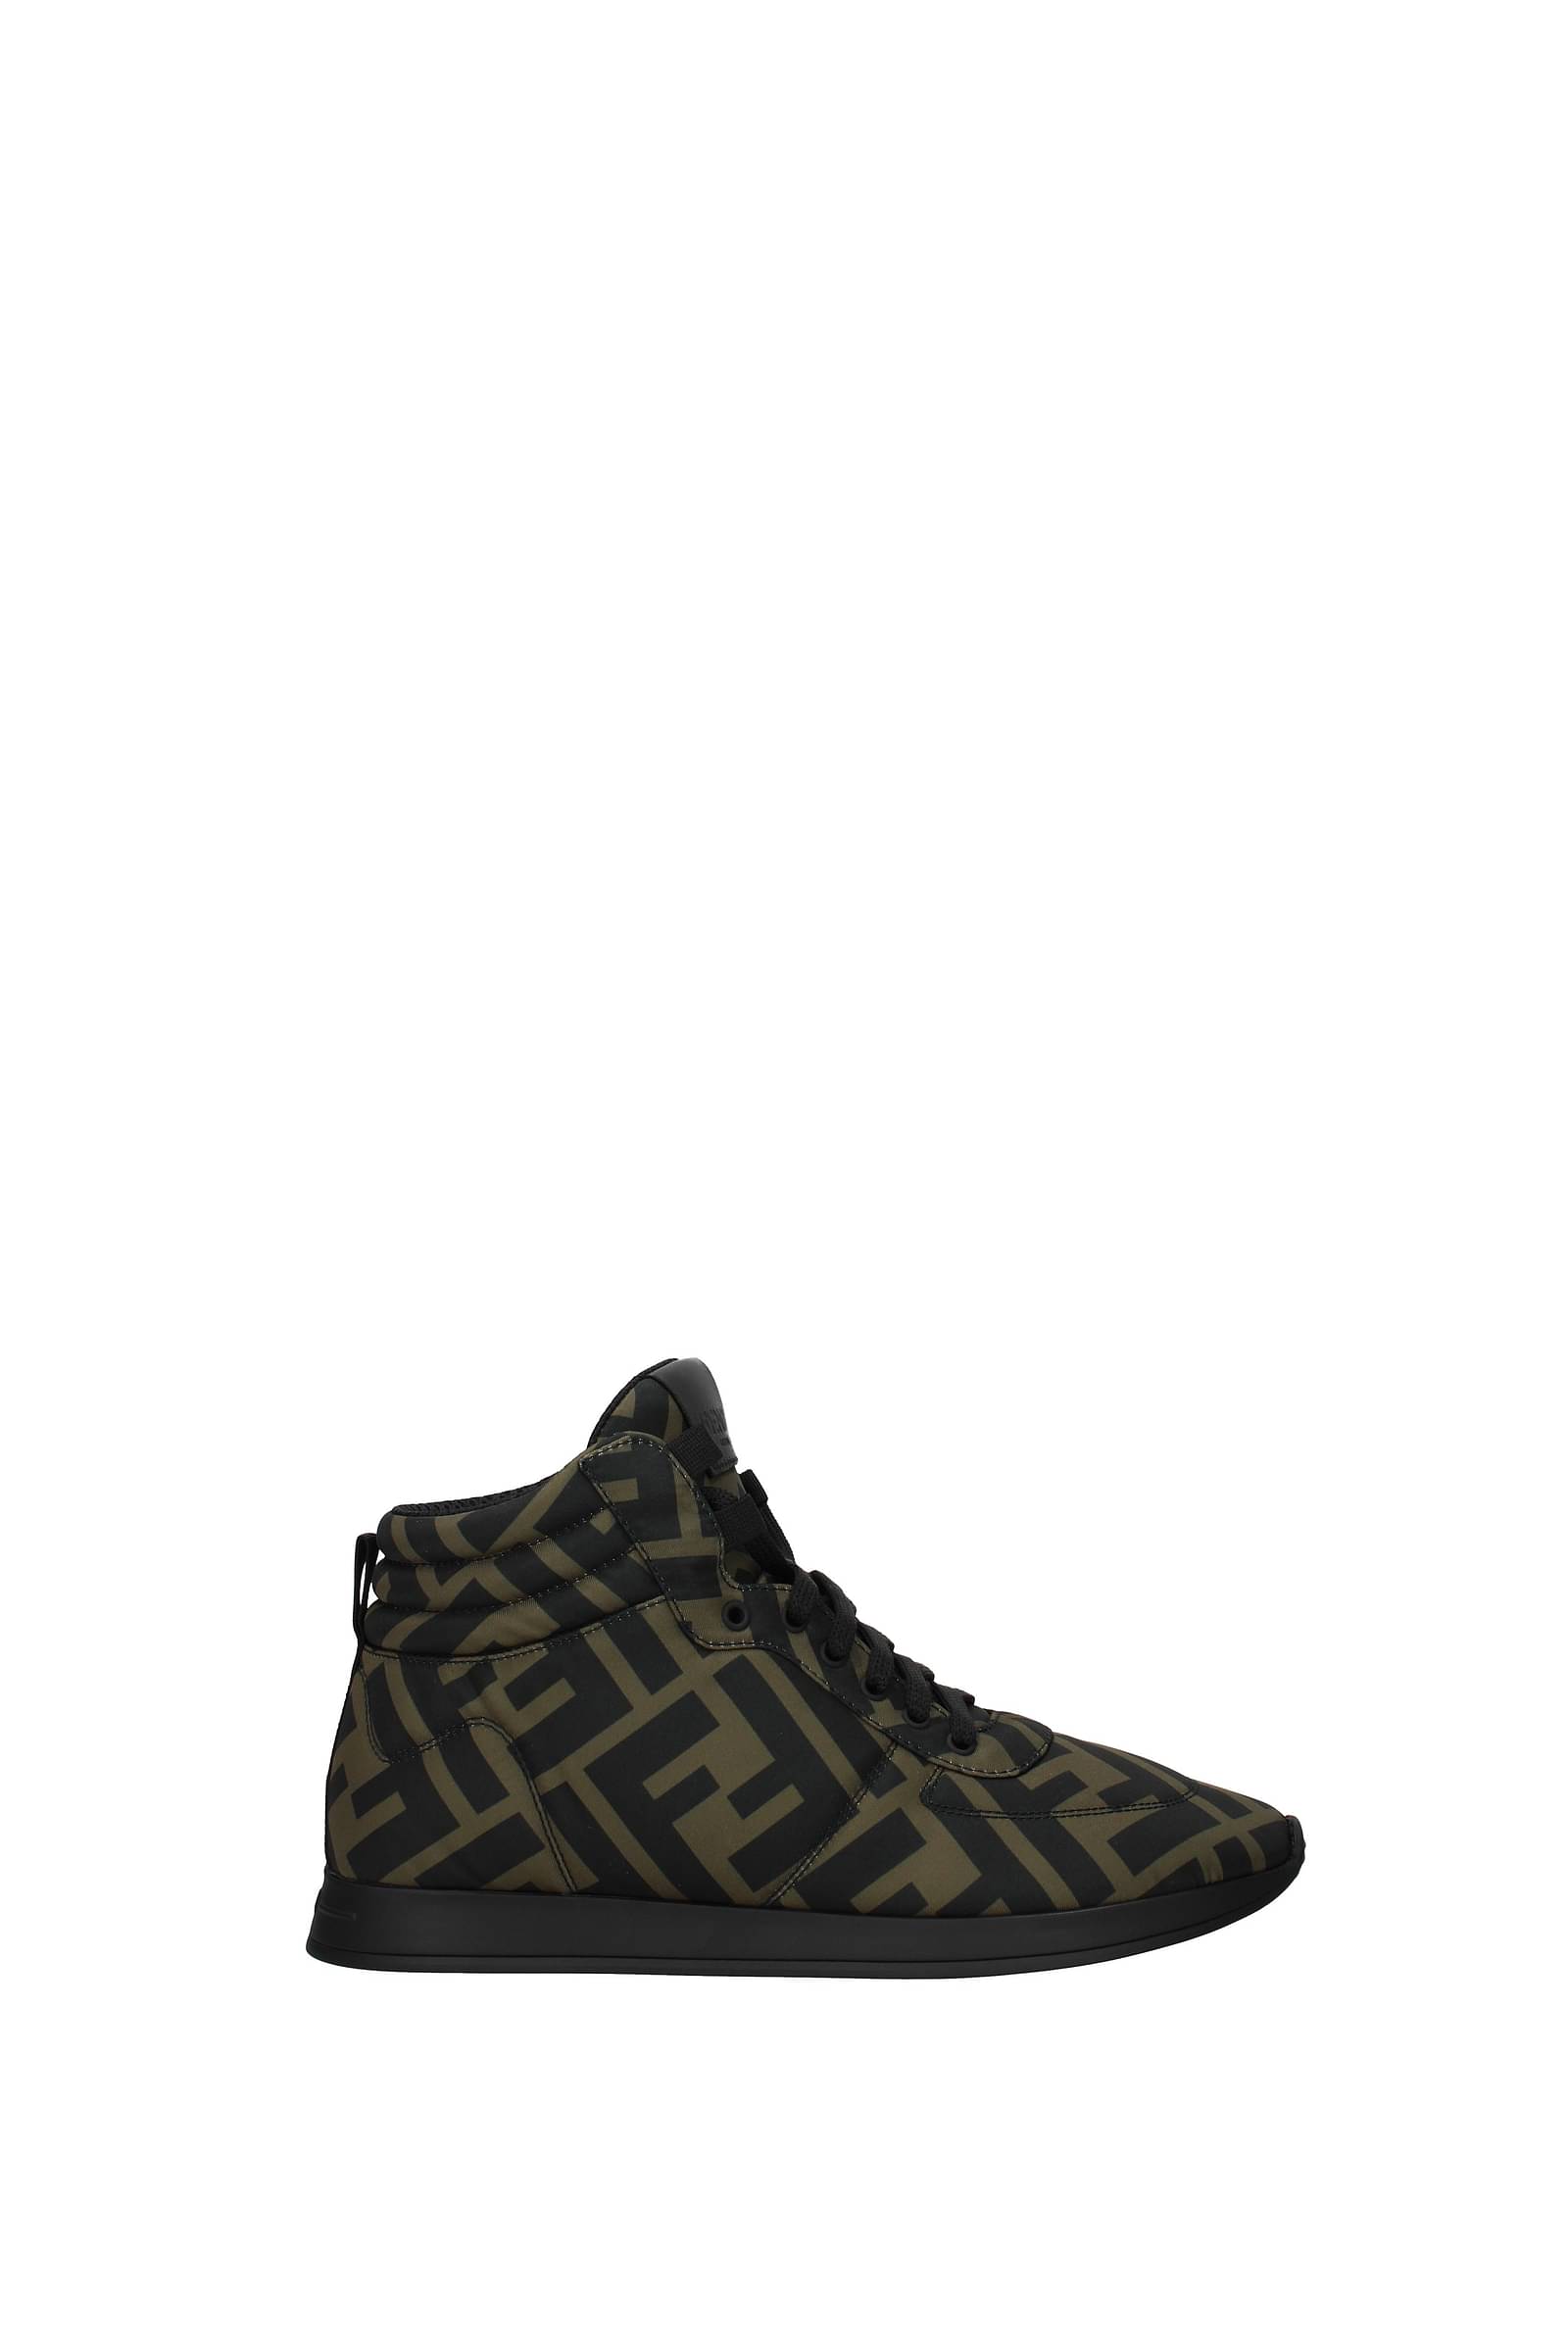 Fendi sneakers sale up to 50% on this 